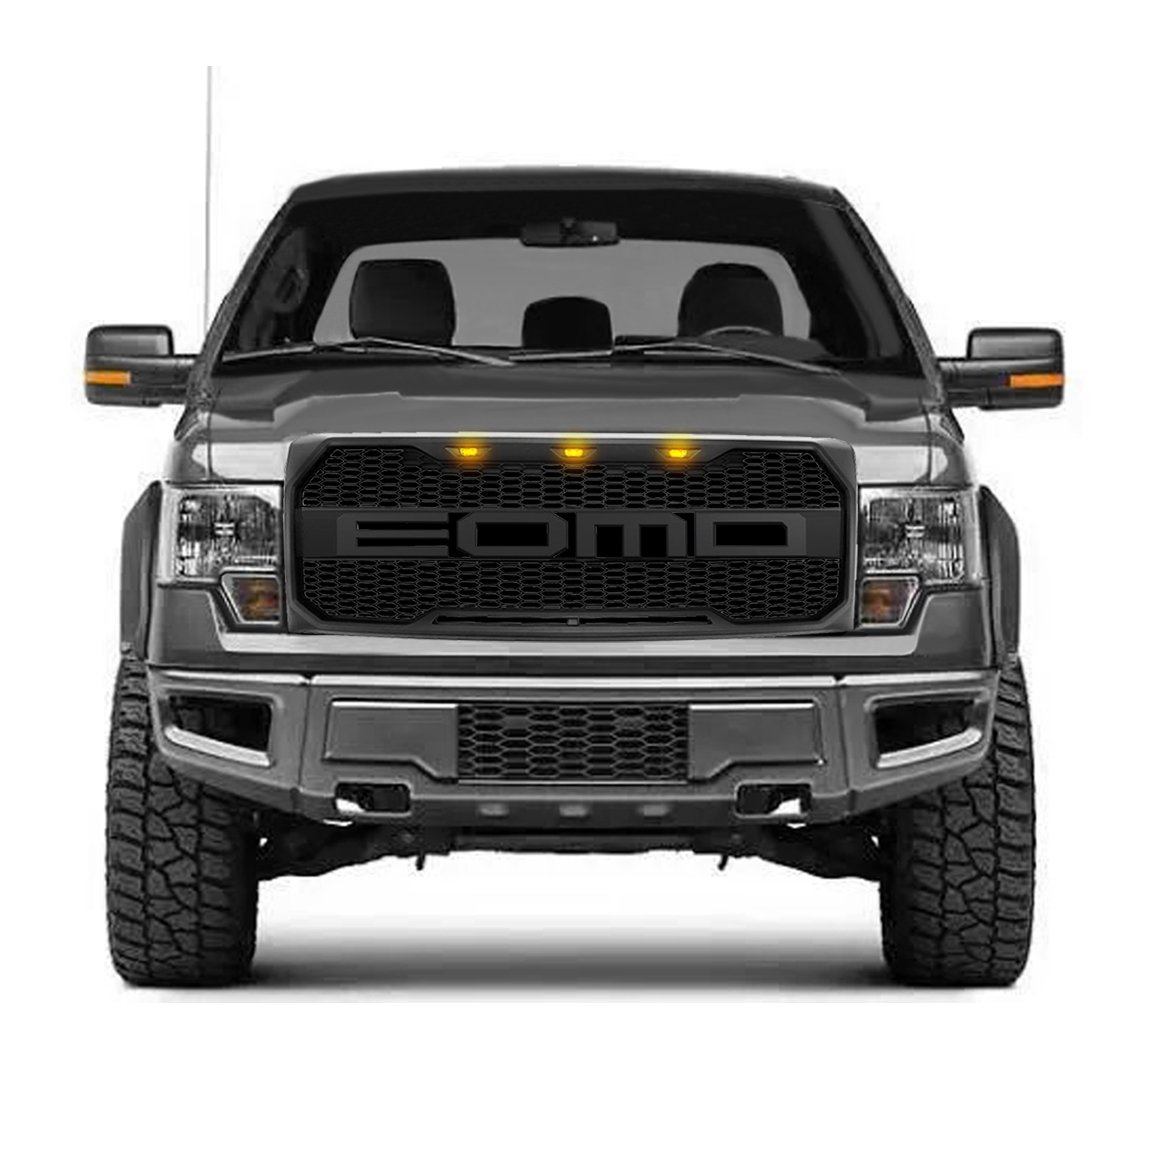 Raptor Style Front Grill Hood Grille W/LED - Matte Black for 2009-2014 Ford F150